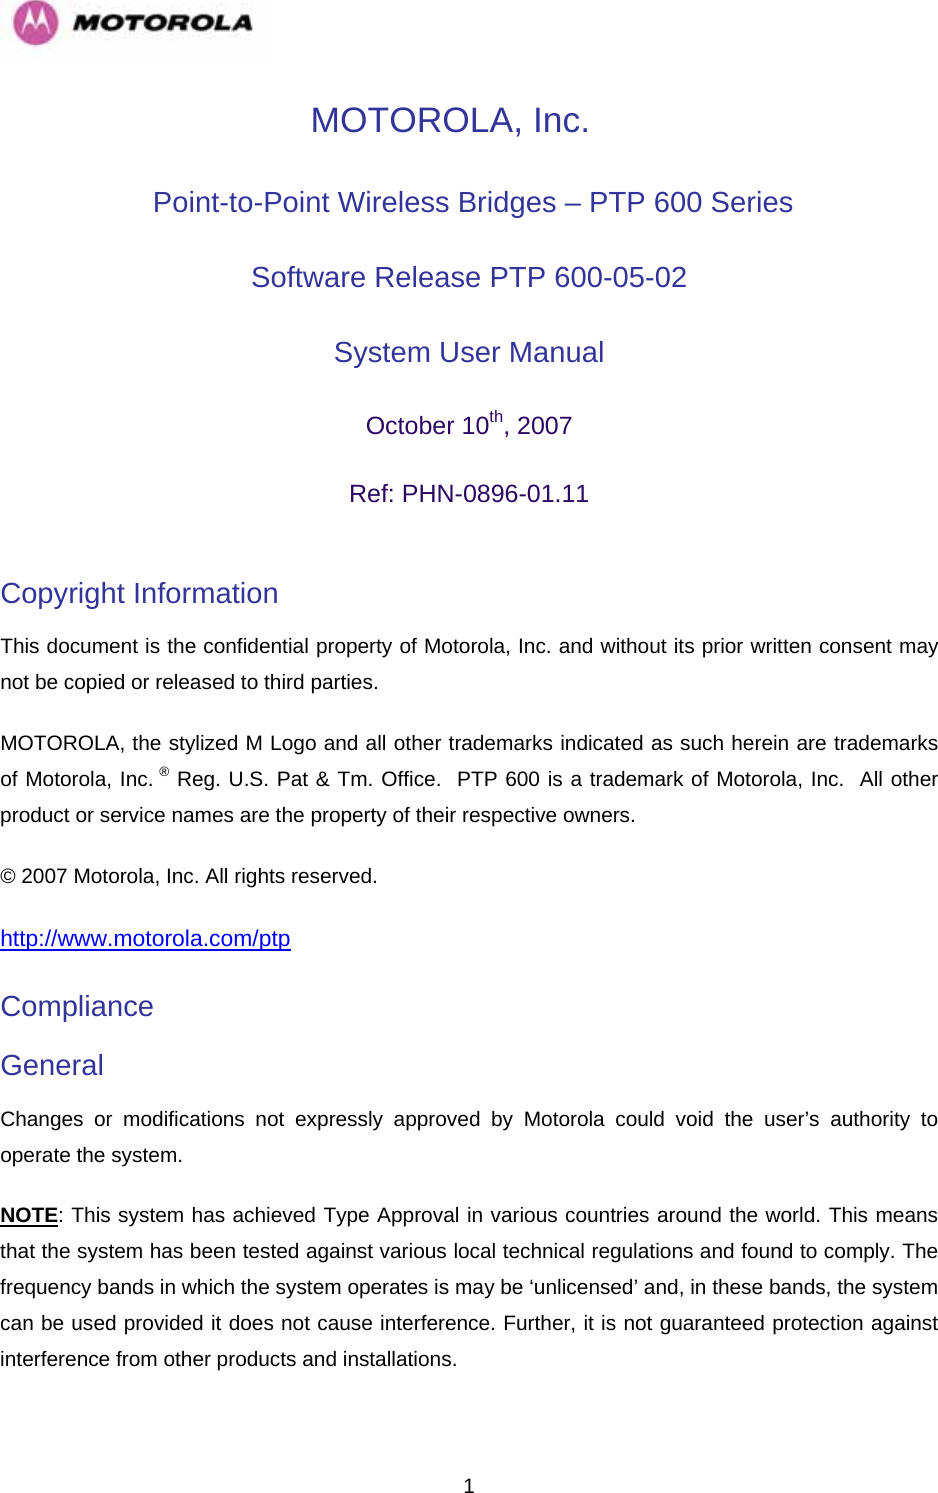   1MOTOROLA, Inc.  Point-to-Point Wireless Bridges – PTP 600 Series Software Release PTP 600-05-02  System User Manual  October 10th, 2007 Ref: PHN-0896-01.11  Copyright Information  This document is the confidential property of Motorola, Inc. and without its prior written consent may not be copied or released to third parties.  MOTOROLA, the stylized M Logo and all other trademarks indicated as such herein are trademarks of Motorola, Inc. ® Reg. U.S. Pat &amp; Tm. Office.  PTP 600 is a trademark of Motorola, Inc.  All other product or service names are the property of their respective owners. © 2007 Motorola, Inc. All rights reserved. http://www.motorola.com/ptpCompliance  General Changes or modifications not expressly approved by Motorola could void the user’s authority to operate the system.  NOTE: This system has achieved Type Approval in various countries around the world. This means that the system has been tested against various local technical regulations and found to comply. The frequency bands in which the system operates is may be ‘unlicensed’ and, in these bands, the system can be used provided it does not cause interference. Further, it is not guaranteed protection against interference from other products and installations. 